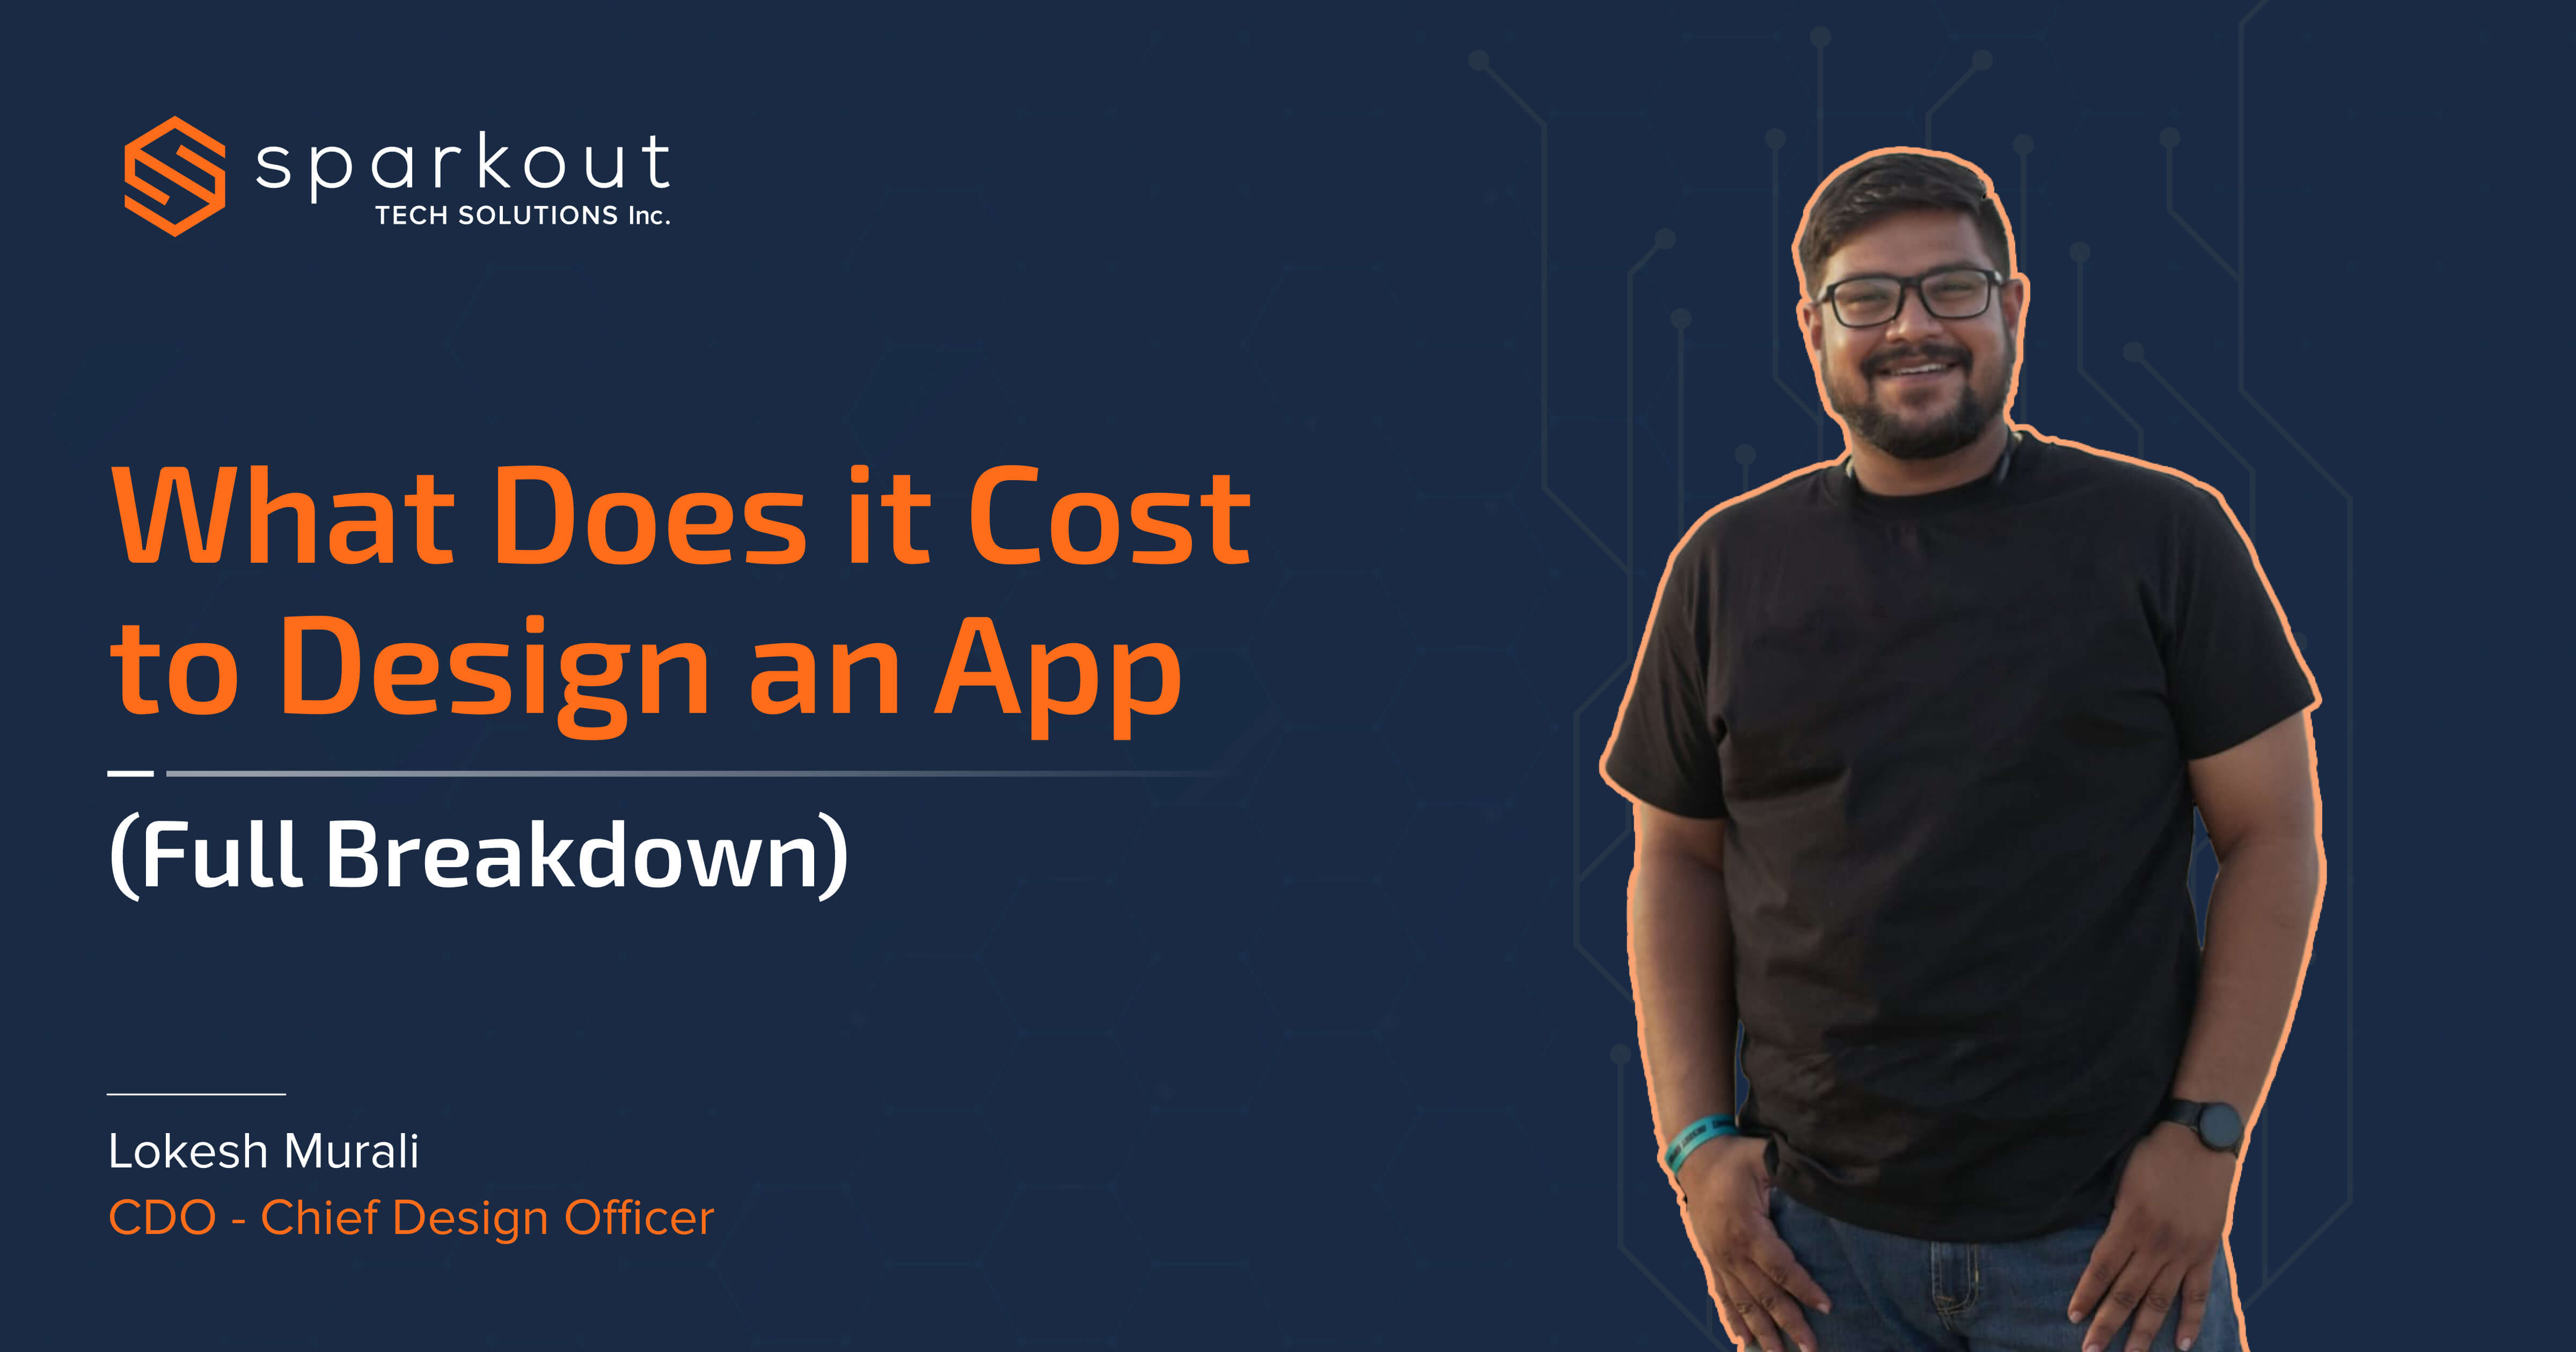 Cost to Design an App